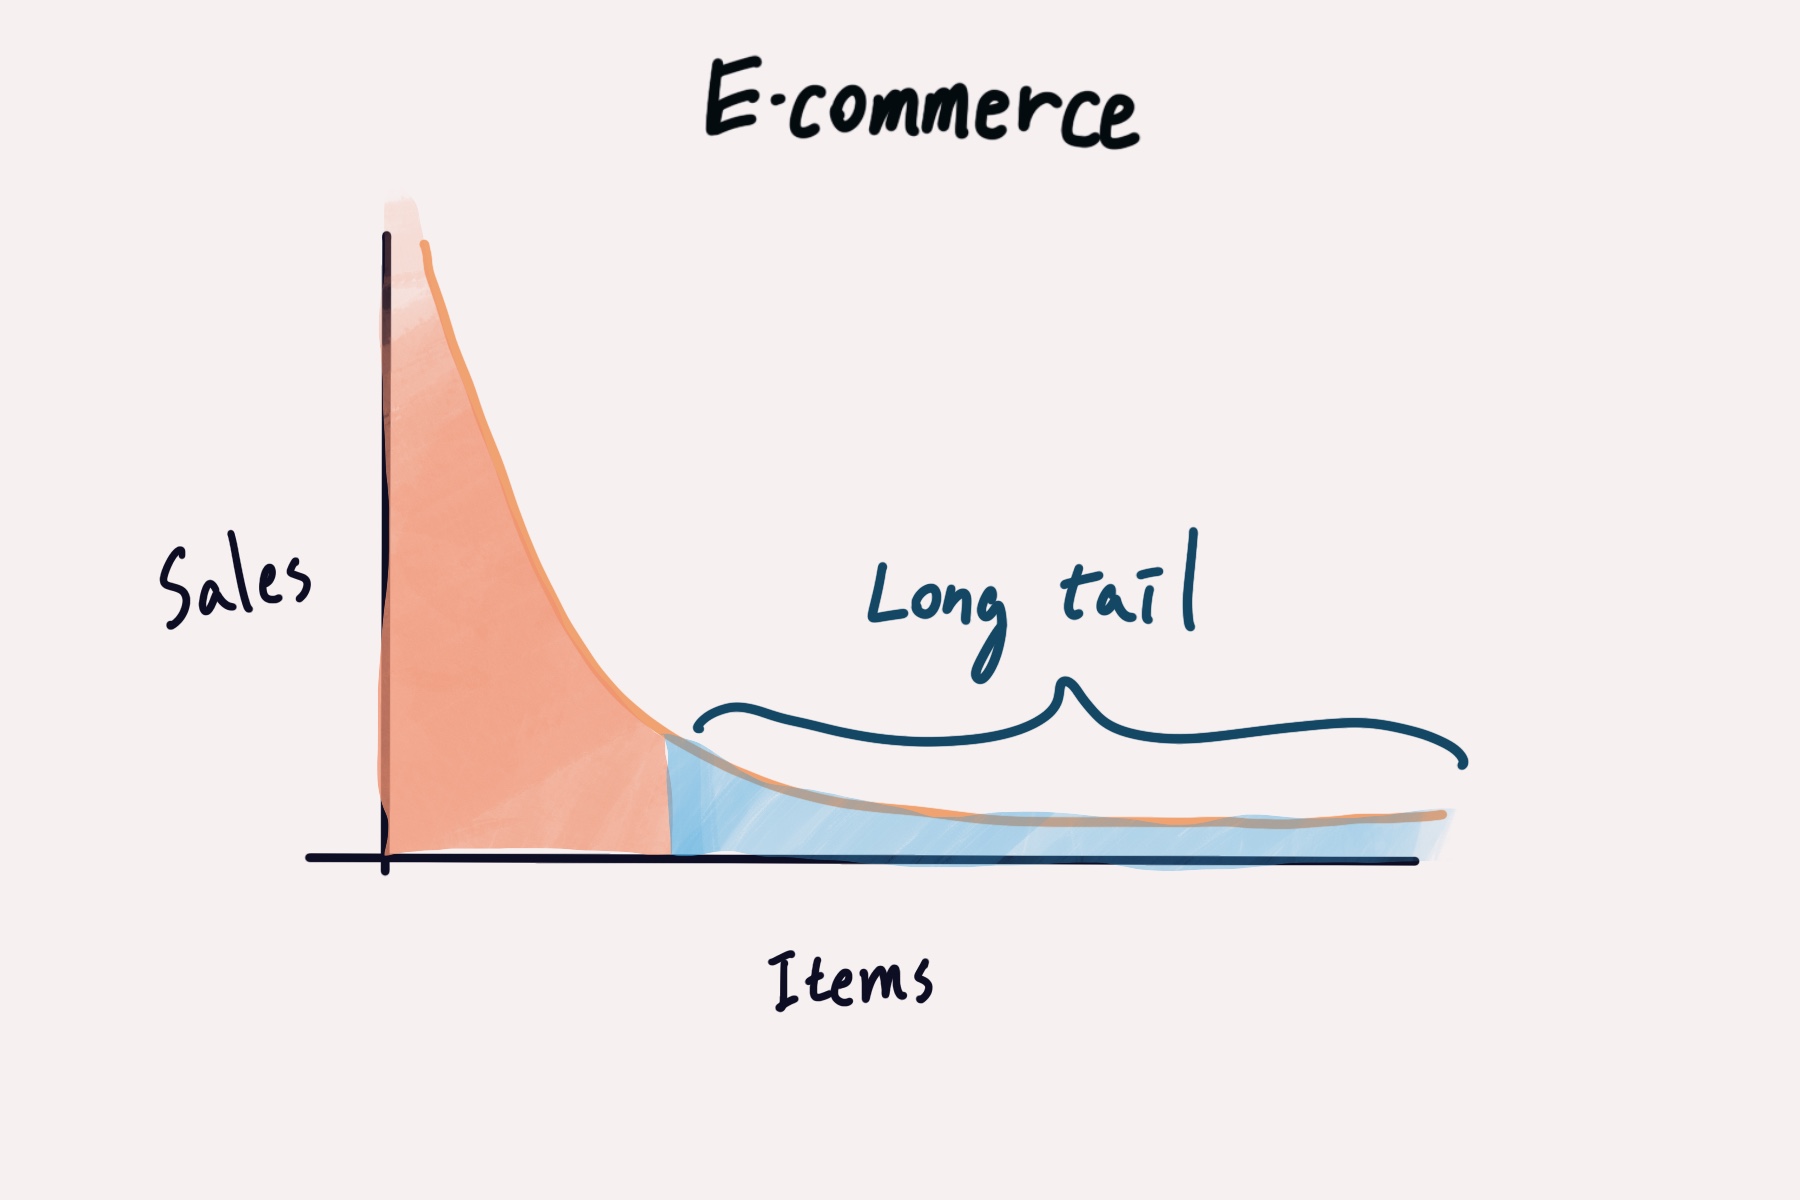 Long tail of e-commerce